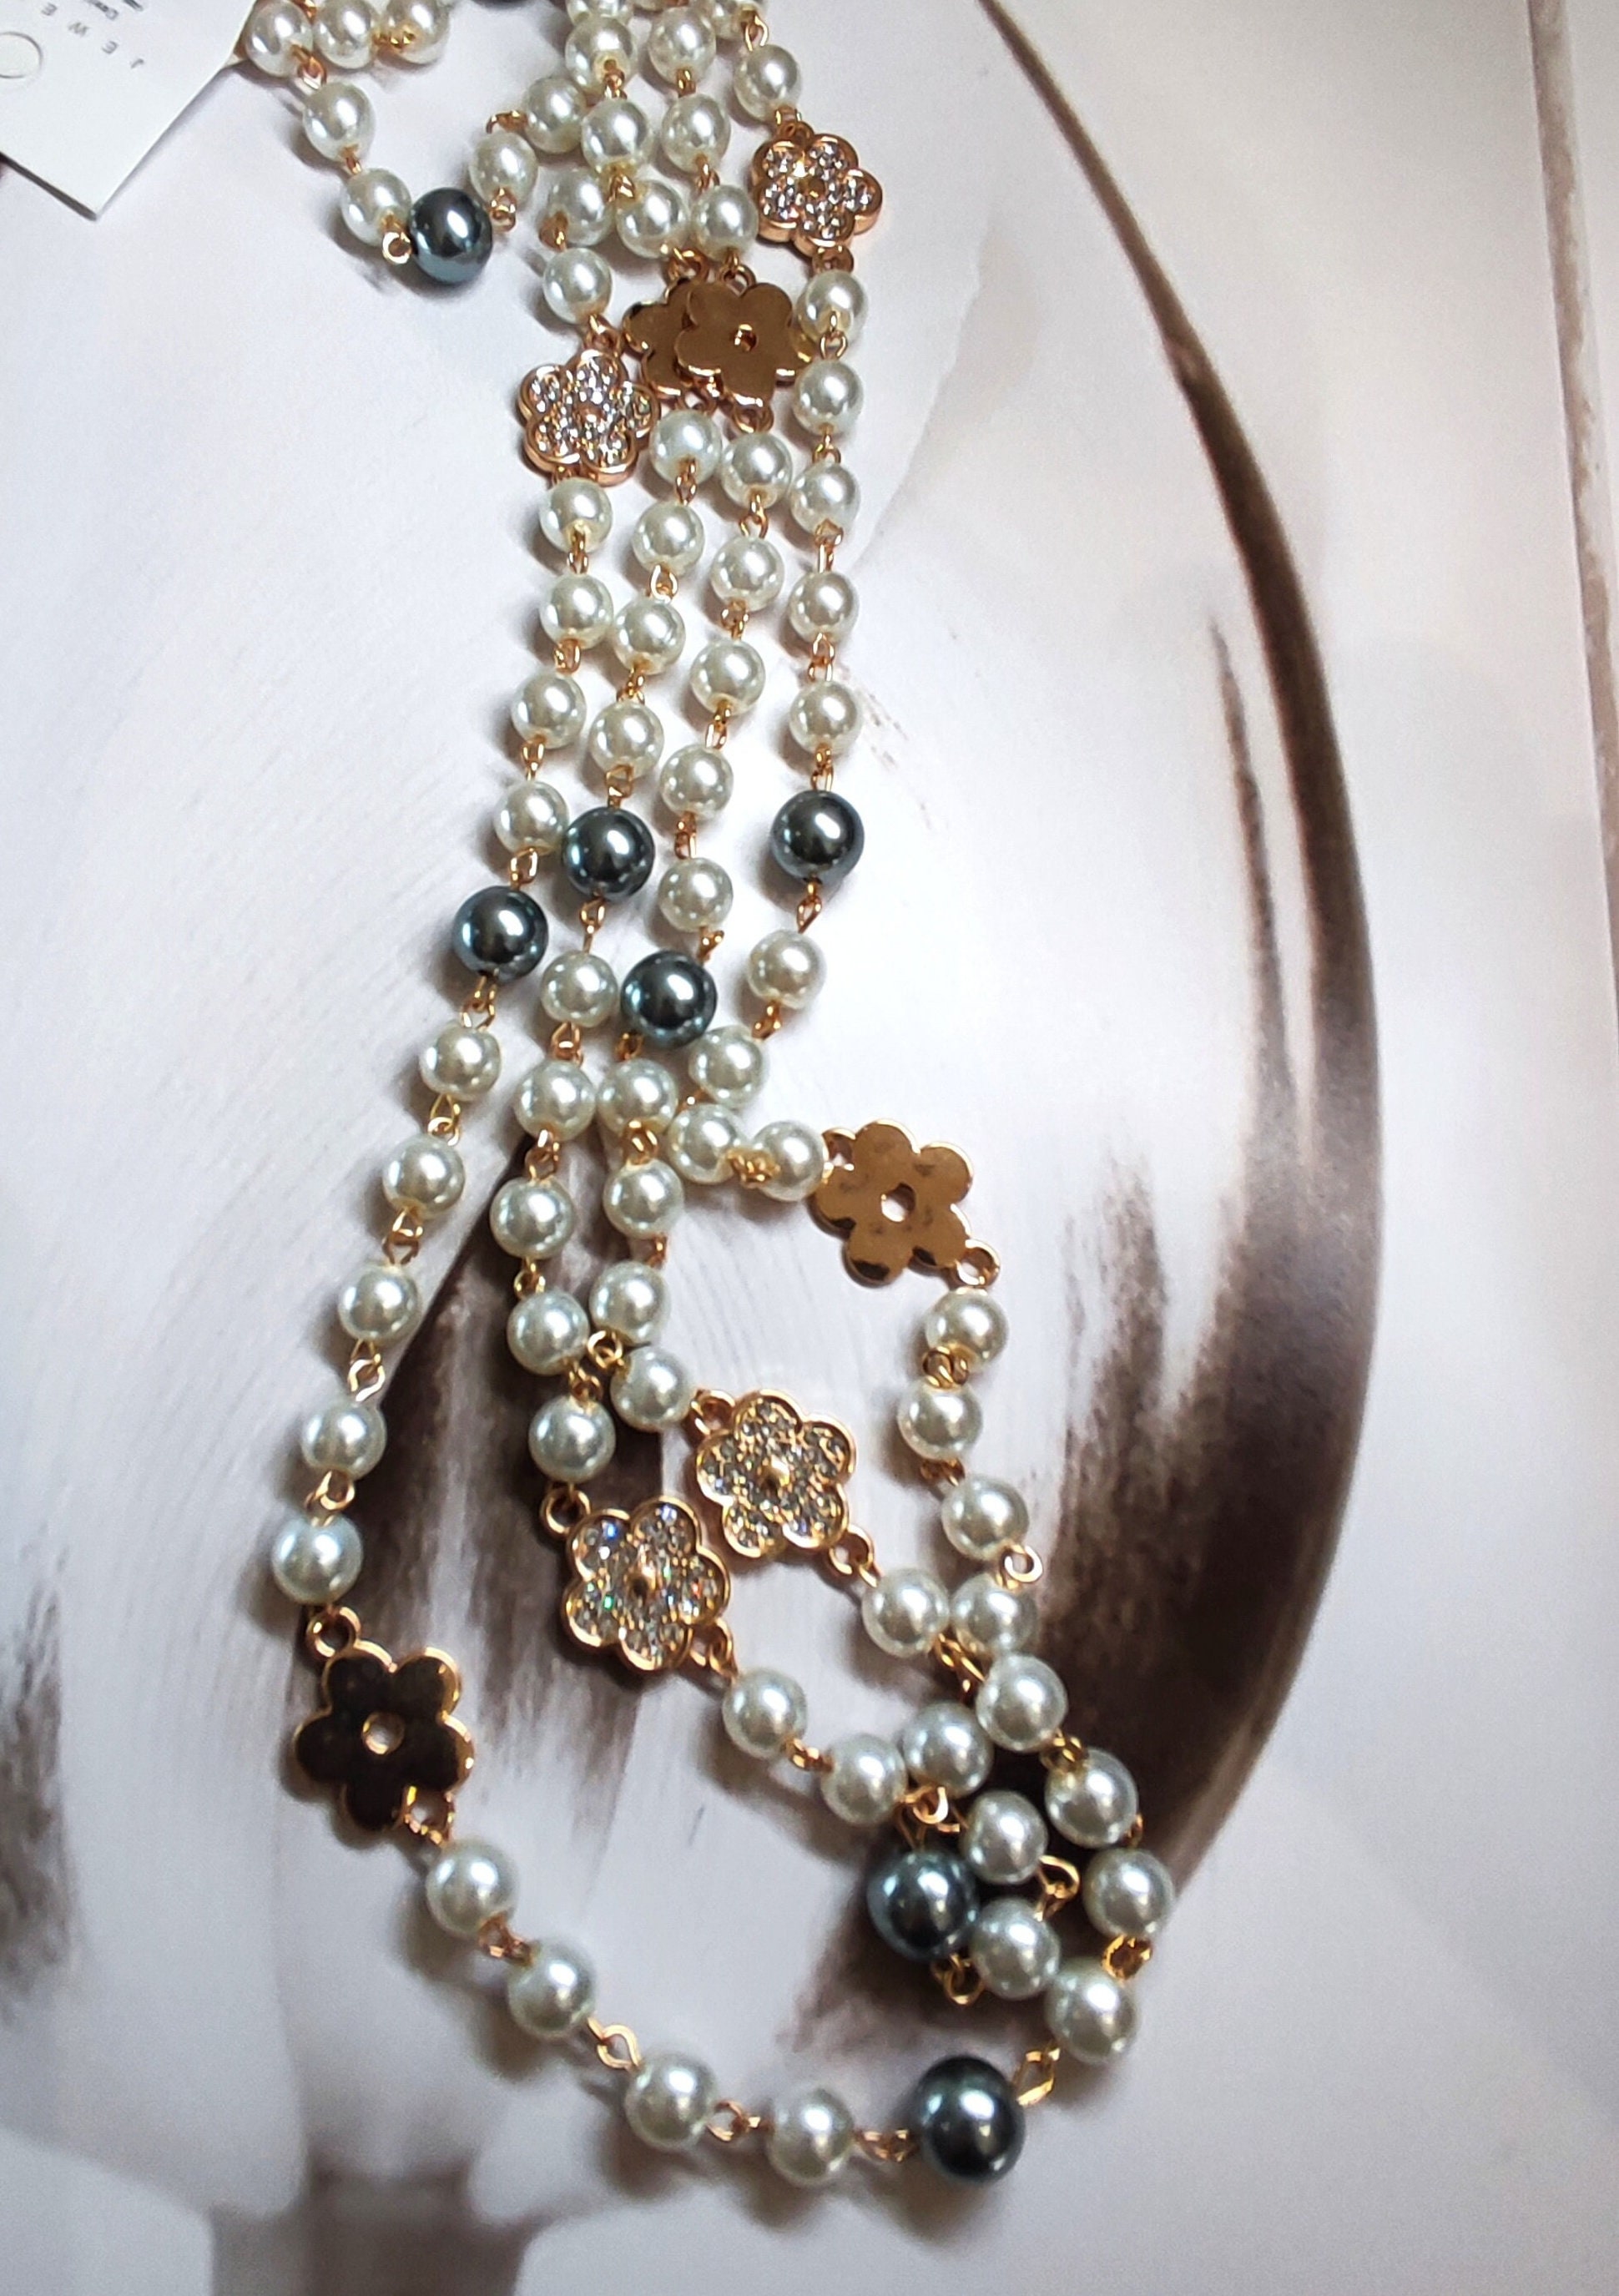 chanel pearls necklace